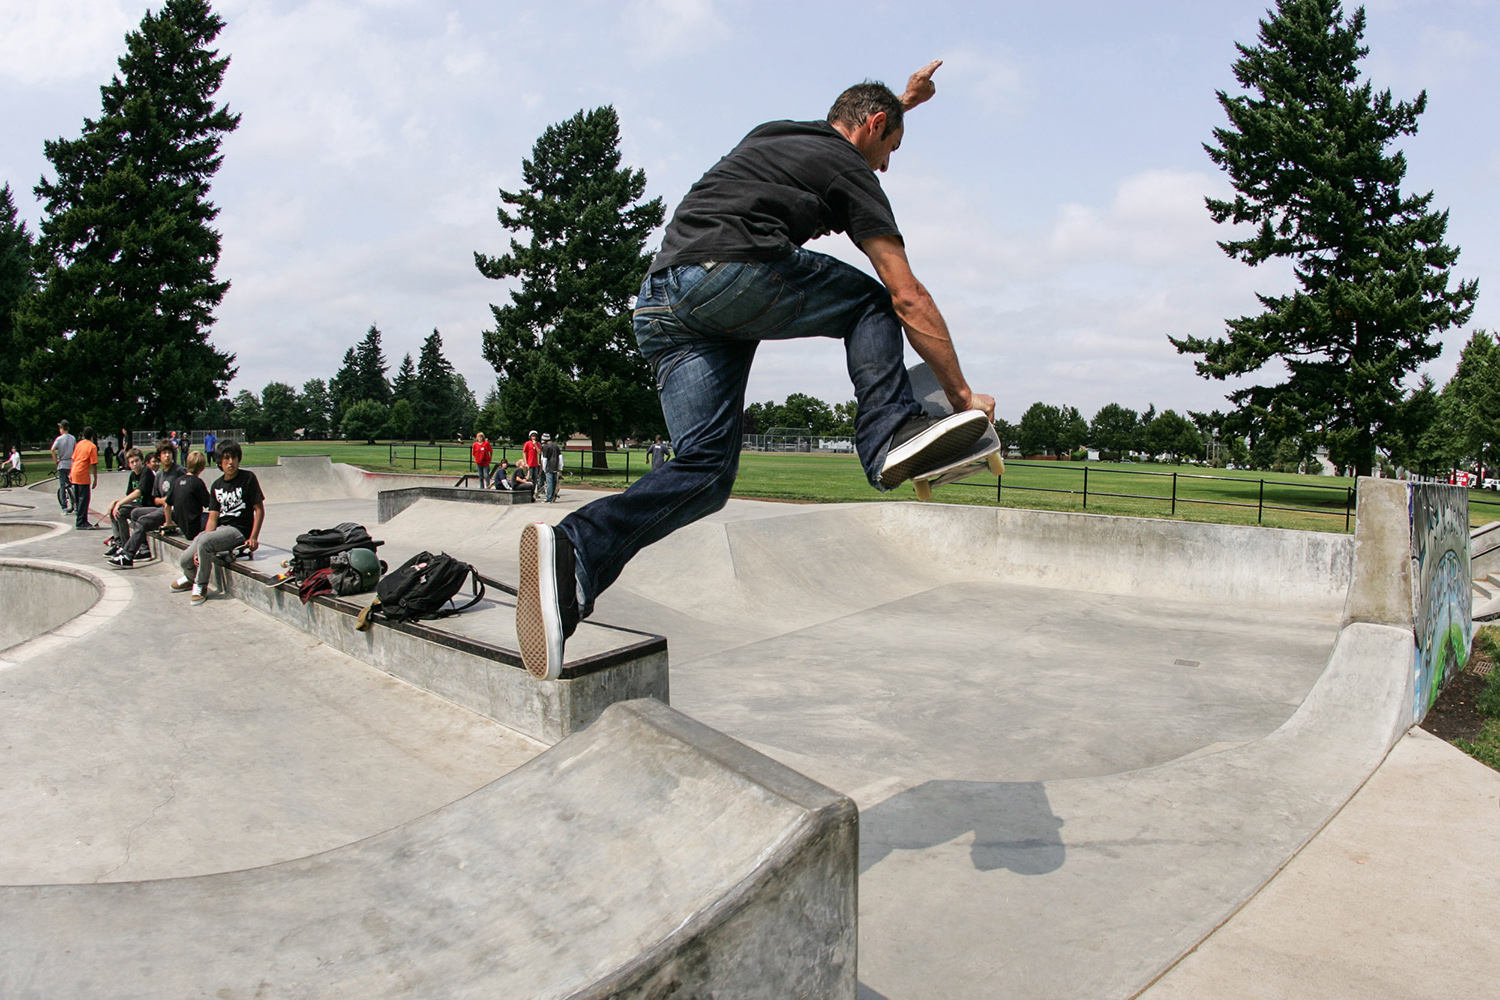  Italian pro skater Daniel Cardone takes a unique approach with this frontside boneless transfer into the street area of Glenhaven Skatepark. 